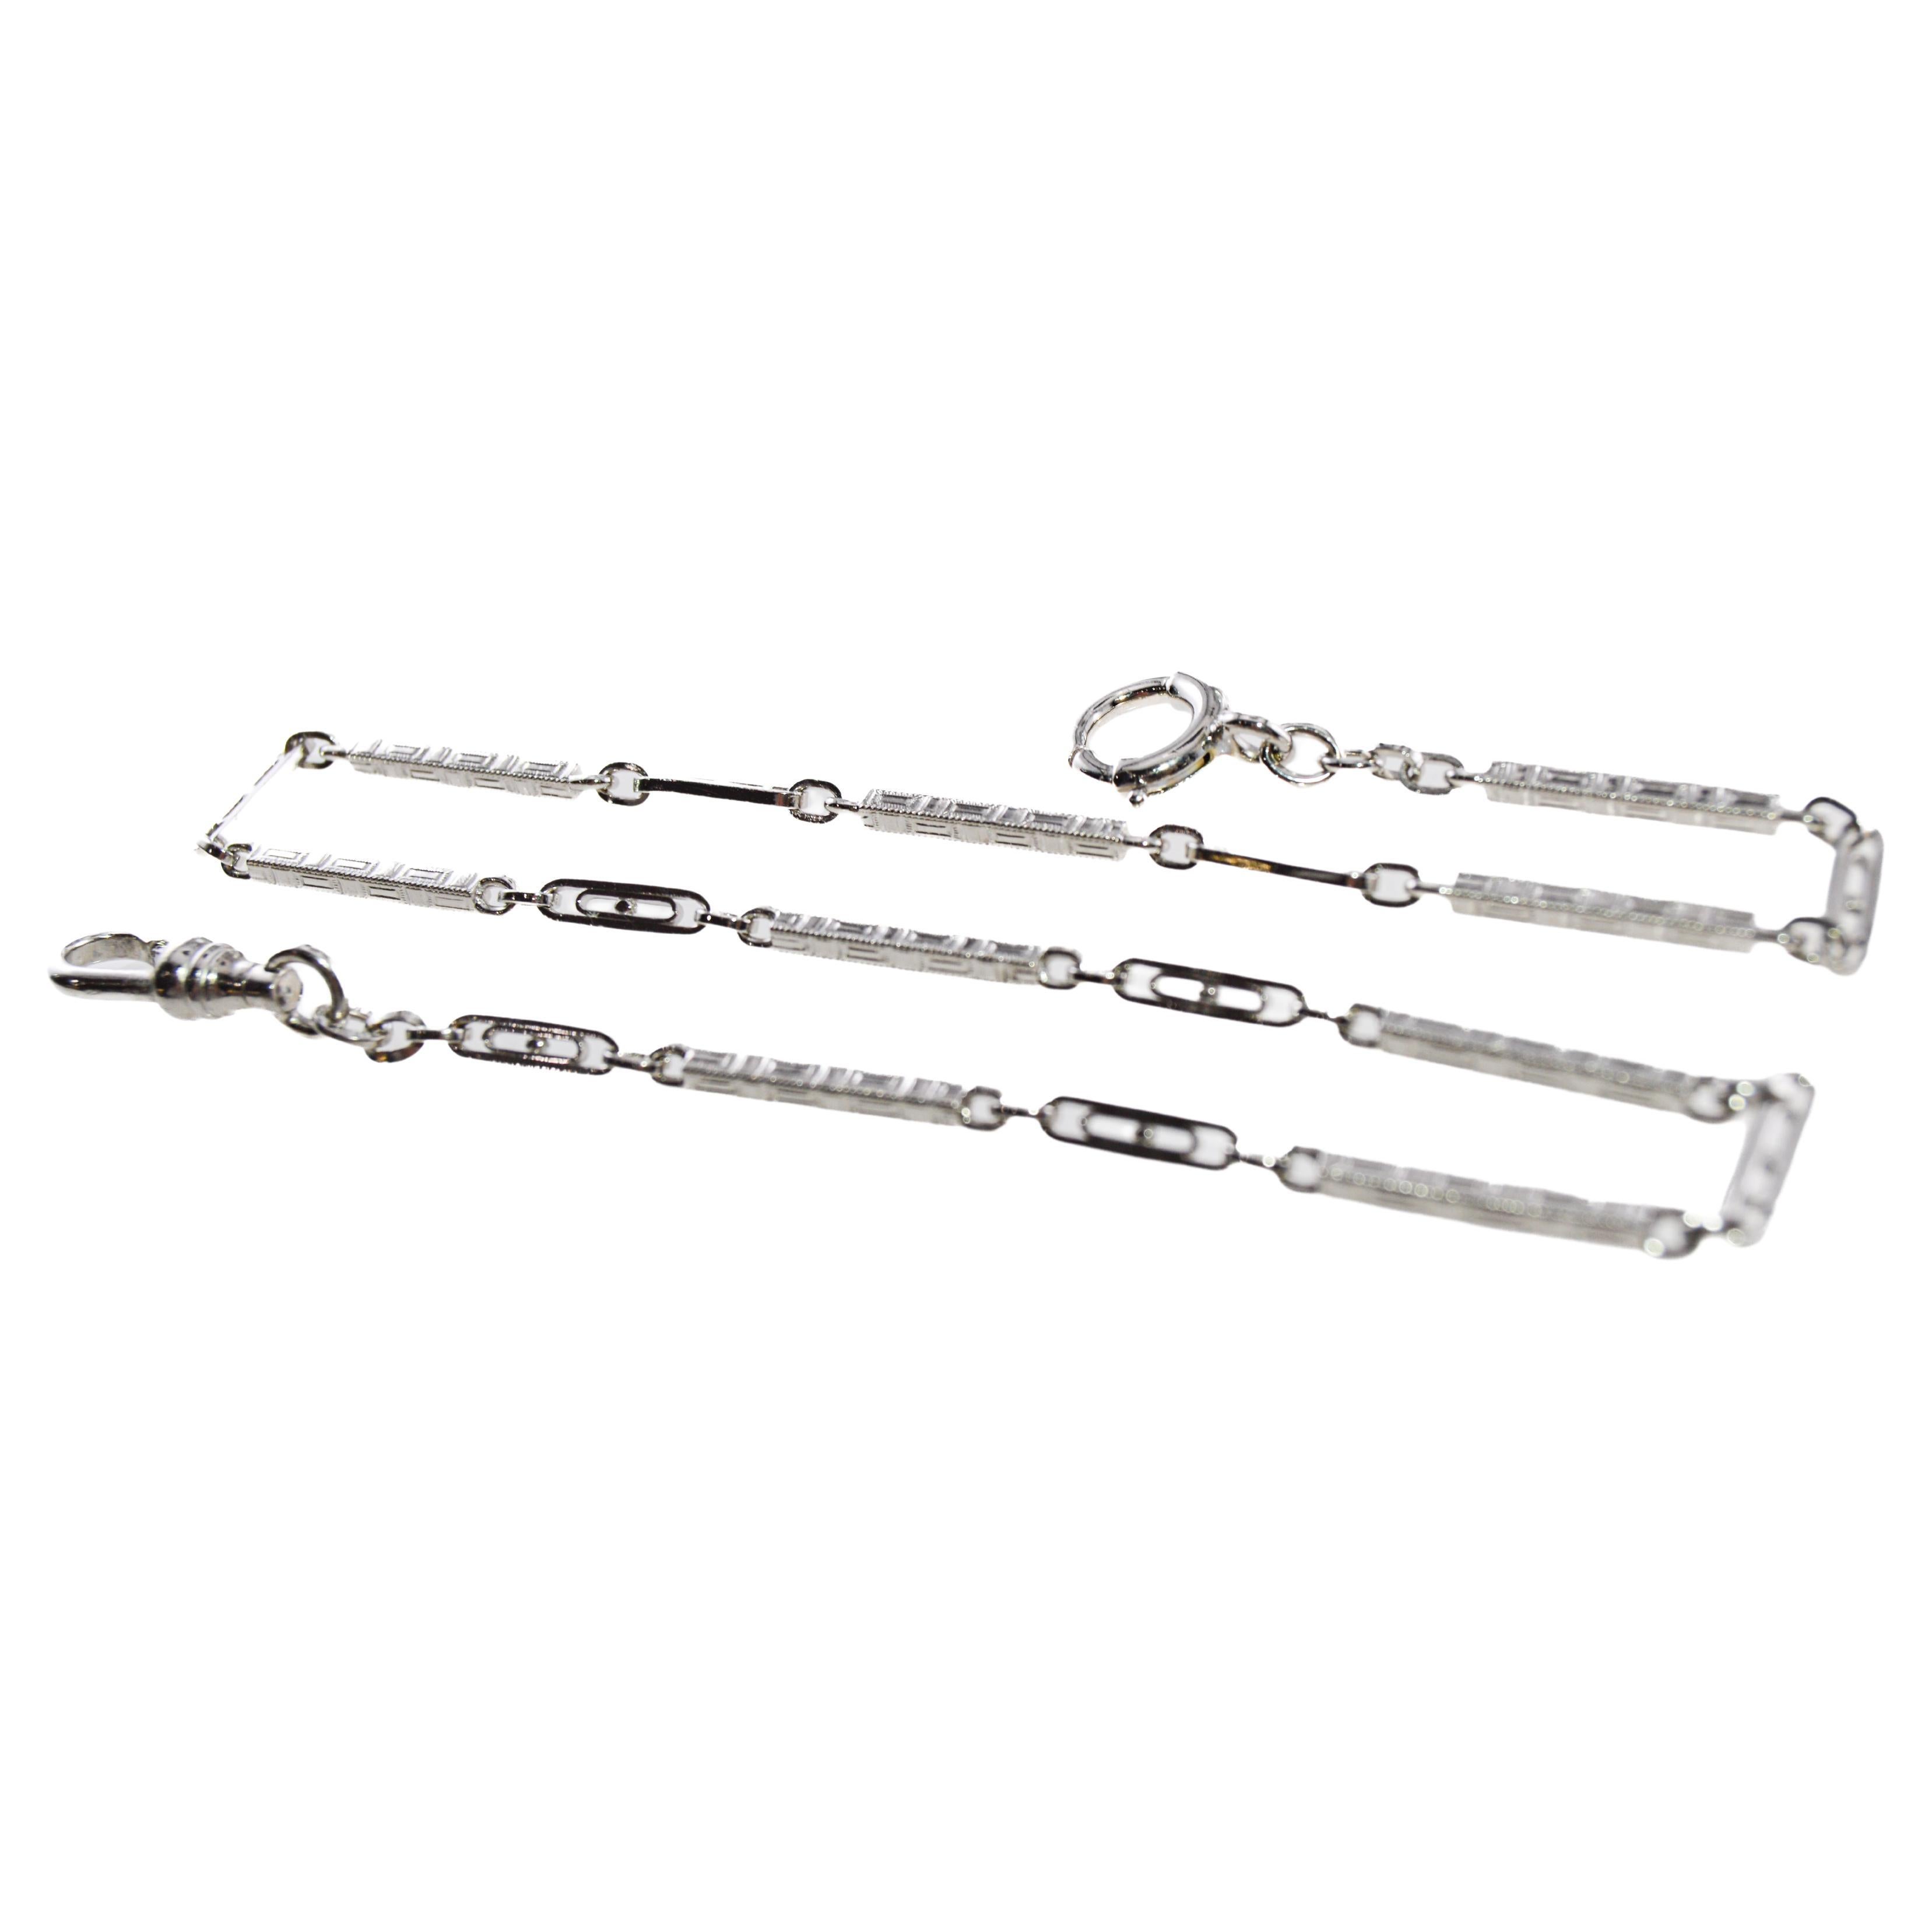 Art Deco 14Kt White Gold Necklace, Bracelet or Pocket Watch Chain circa 1920's / 30's For Sale